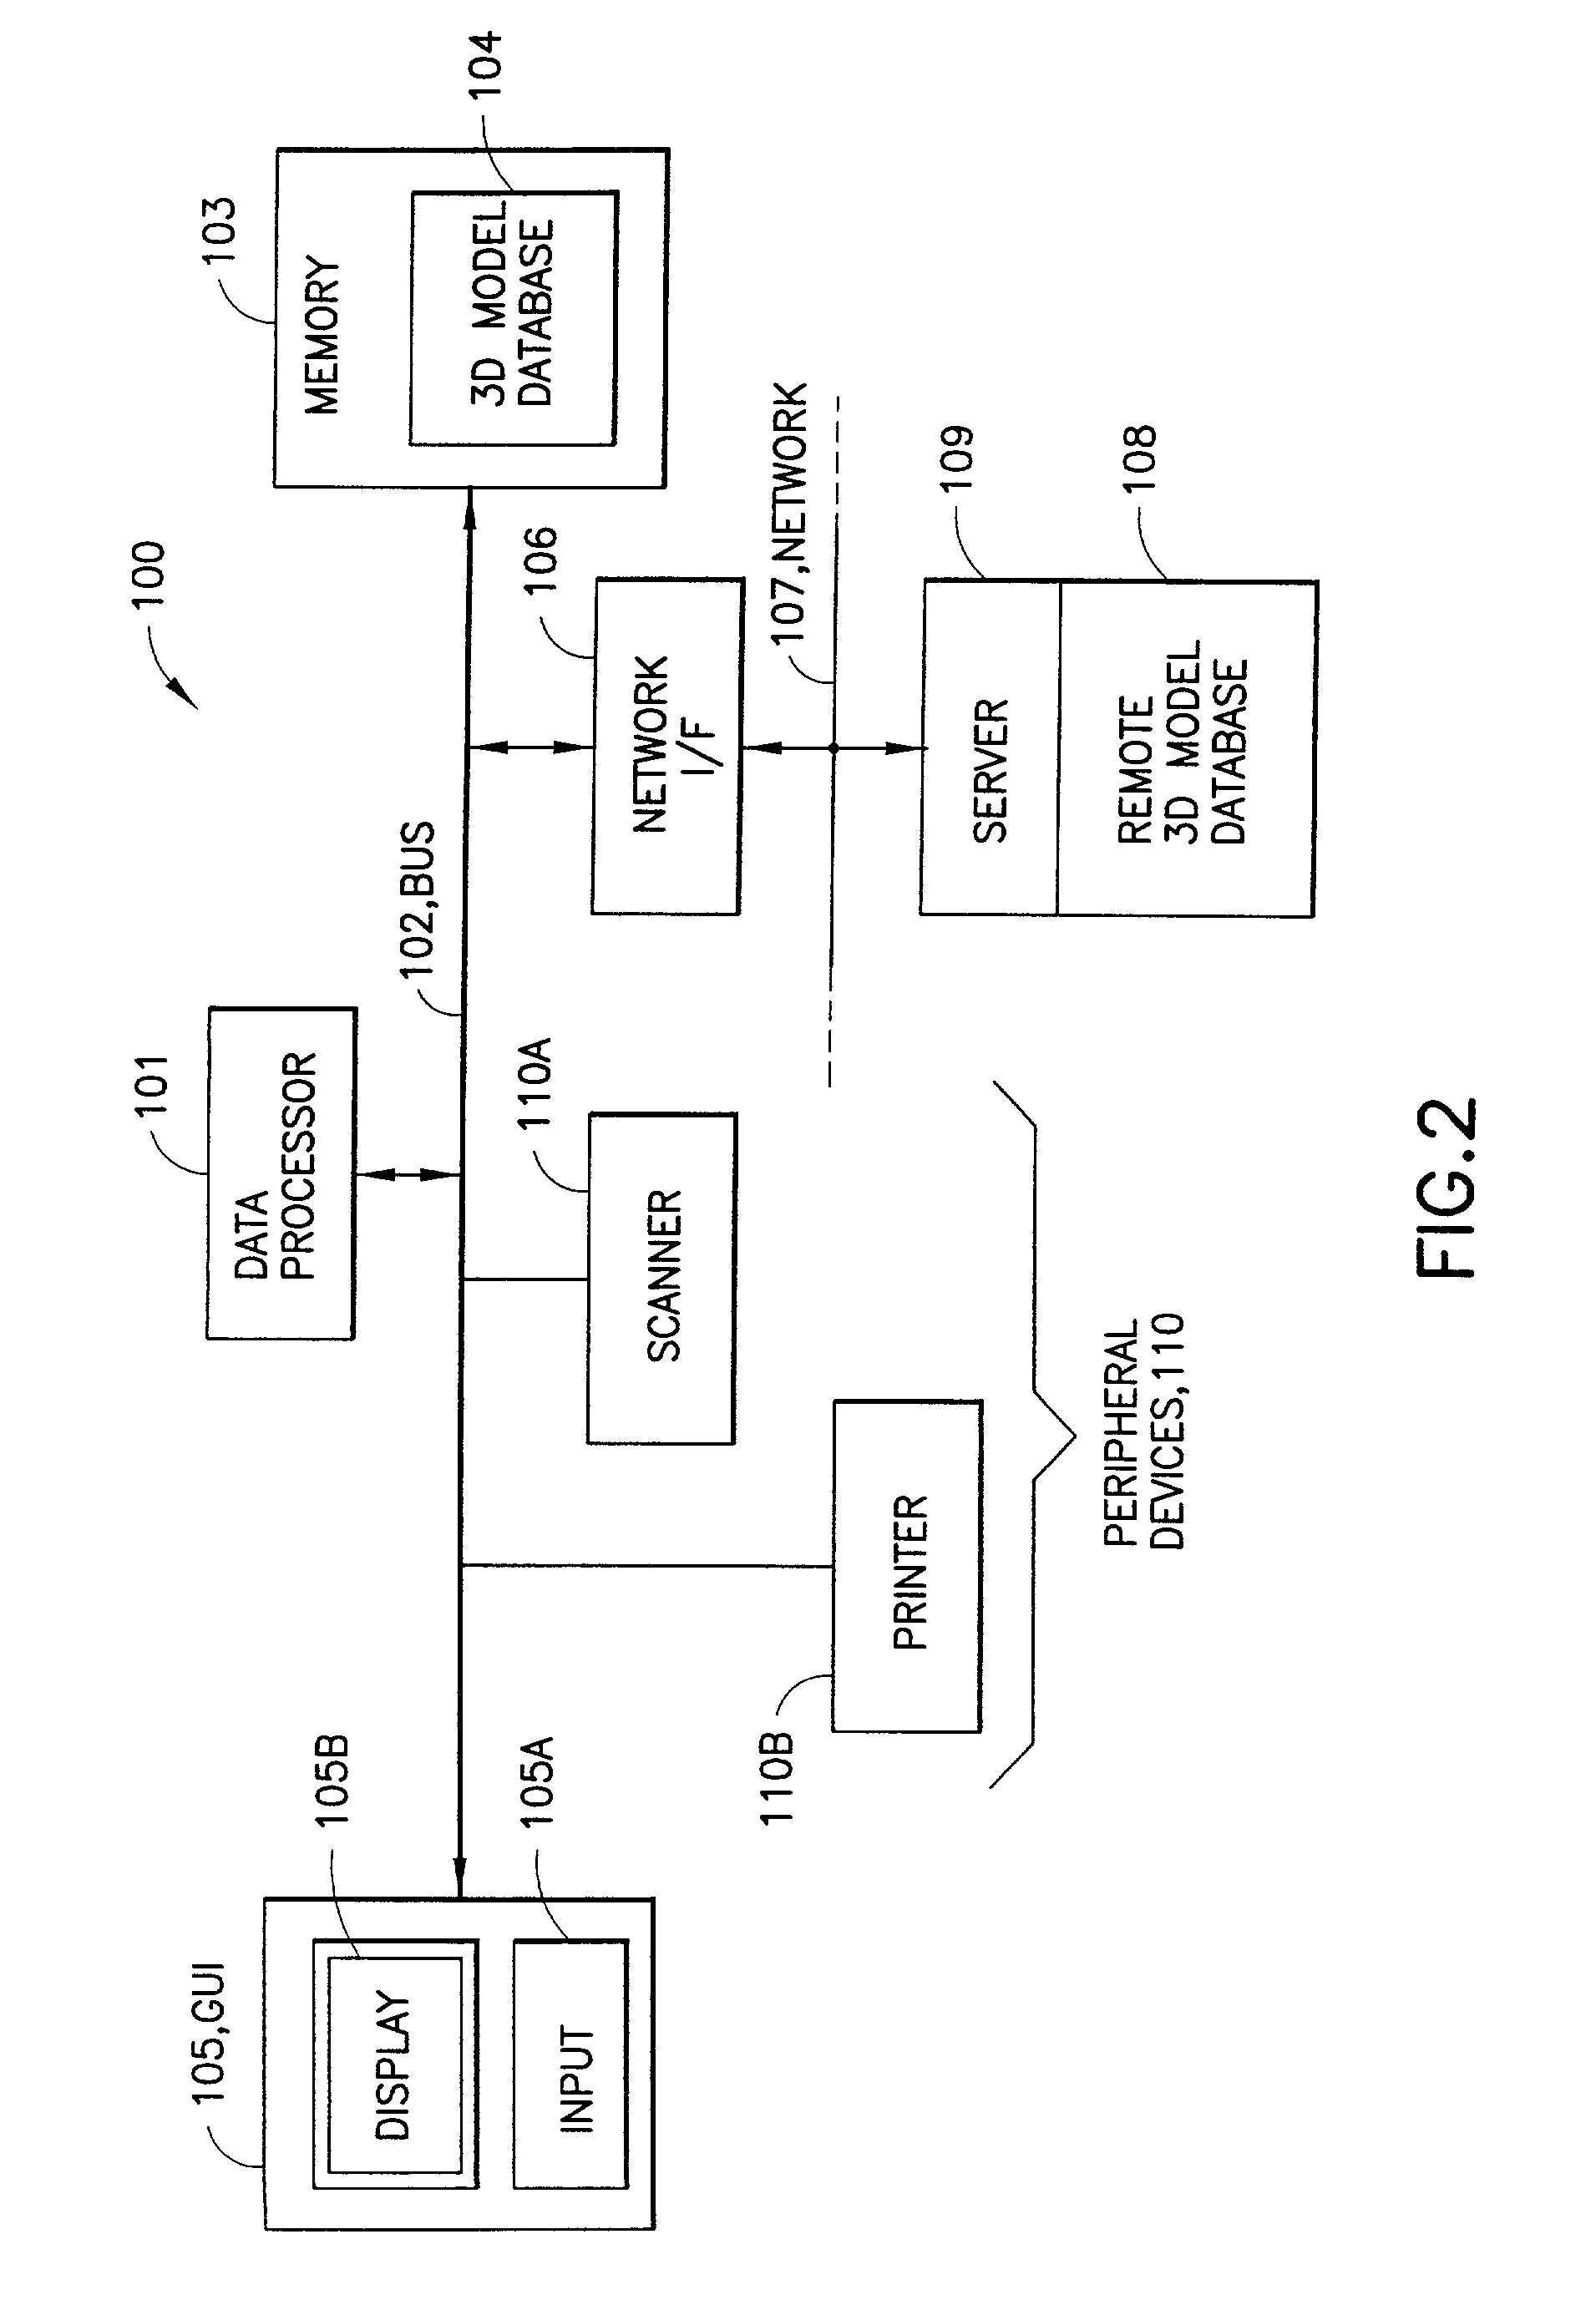 Methods and apparatus for cut-and-paste editing of multiresolution surfaces